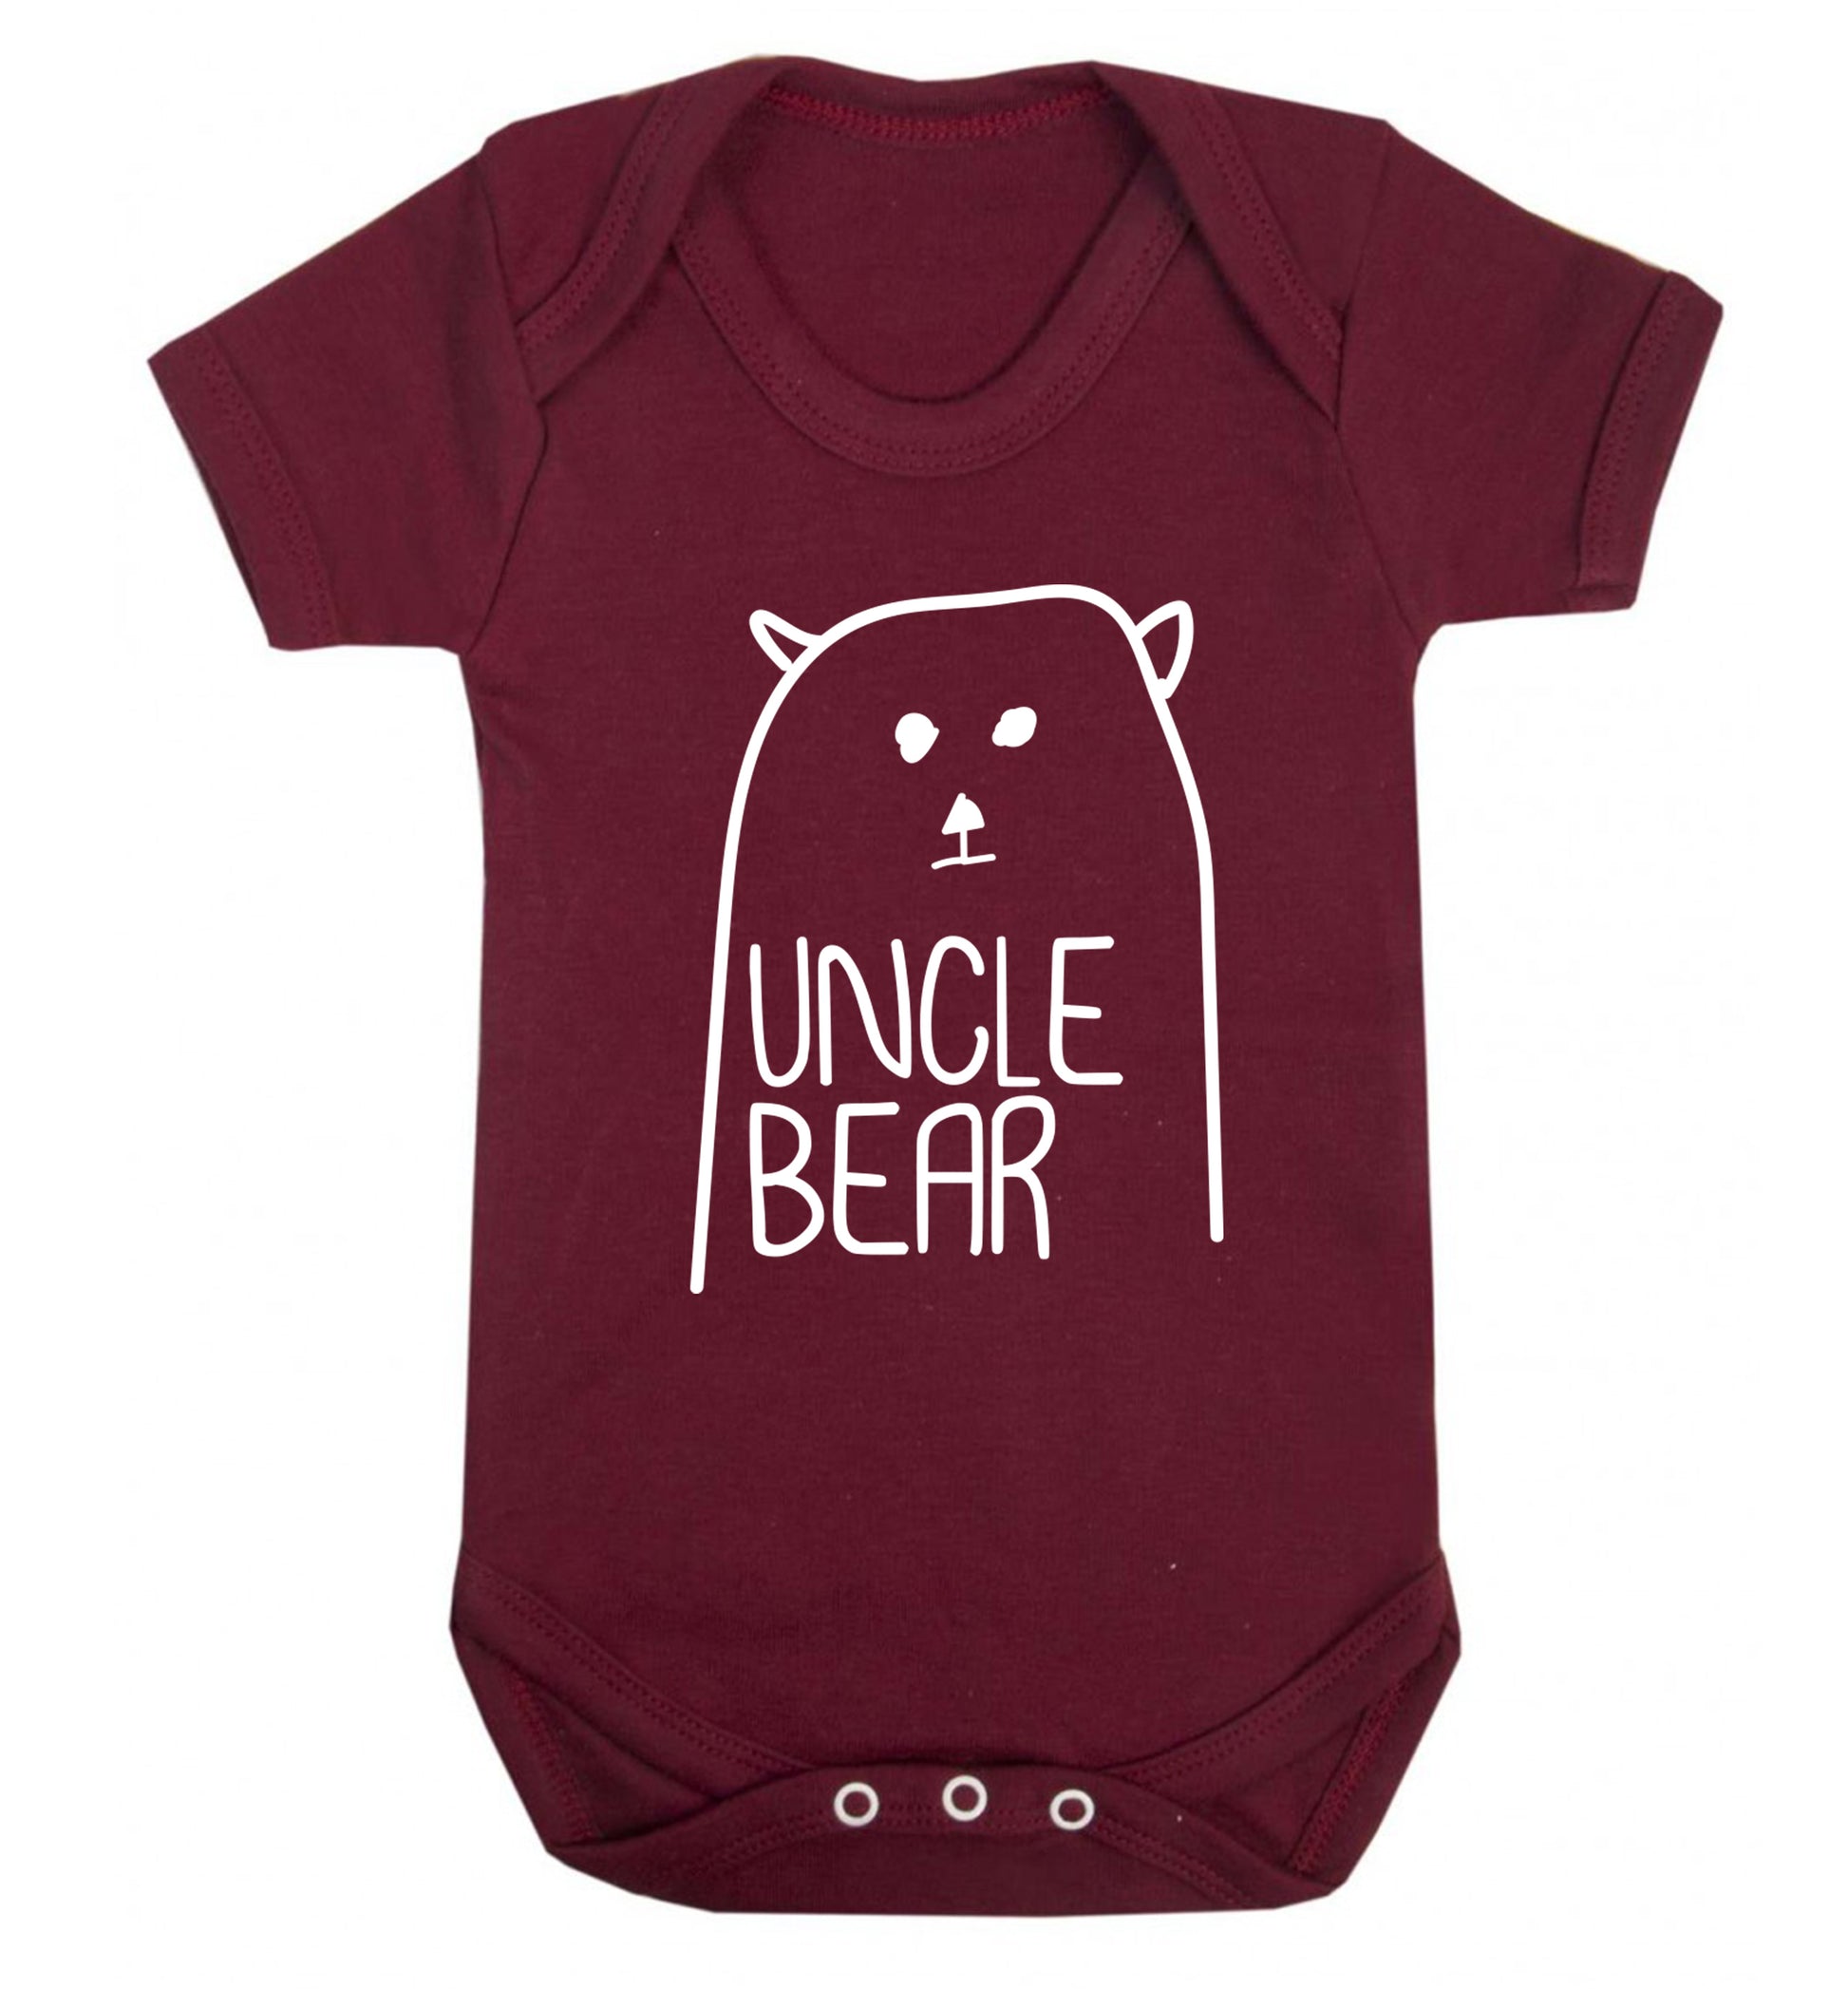 Uncle bear Baby Vest maroon 18-24 months